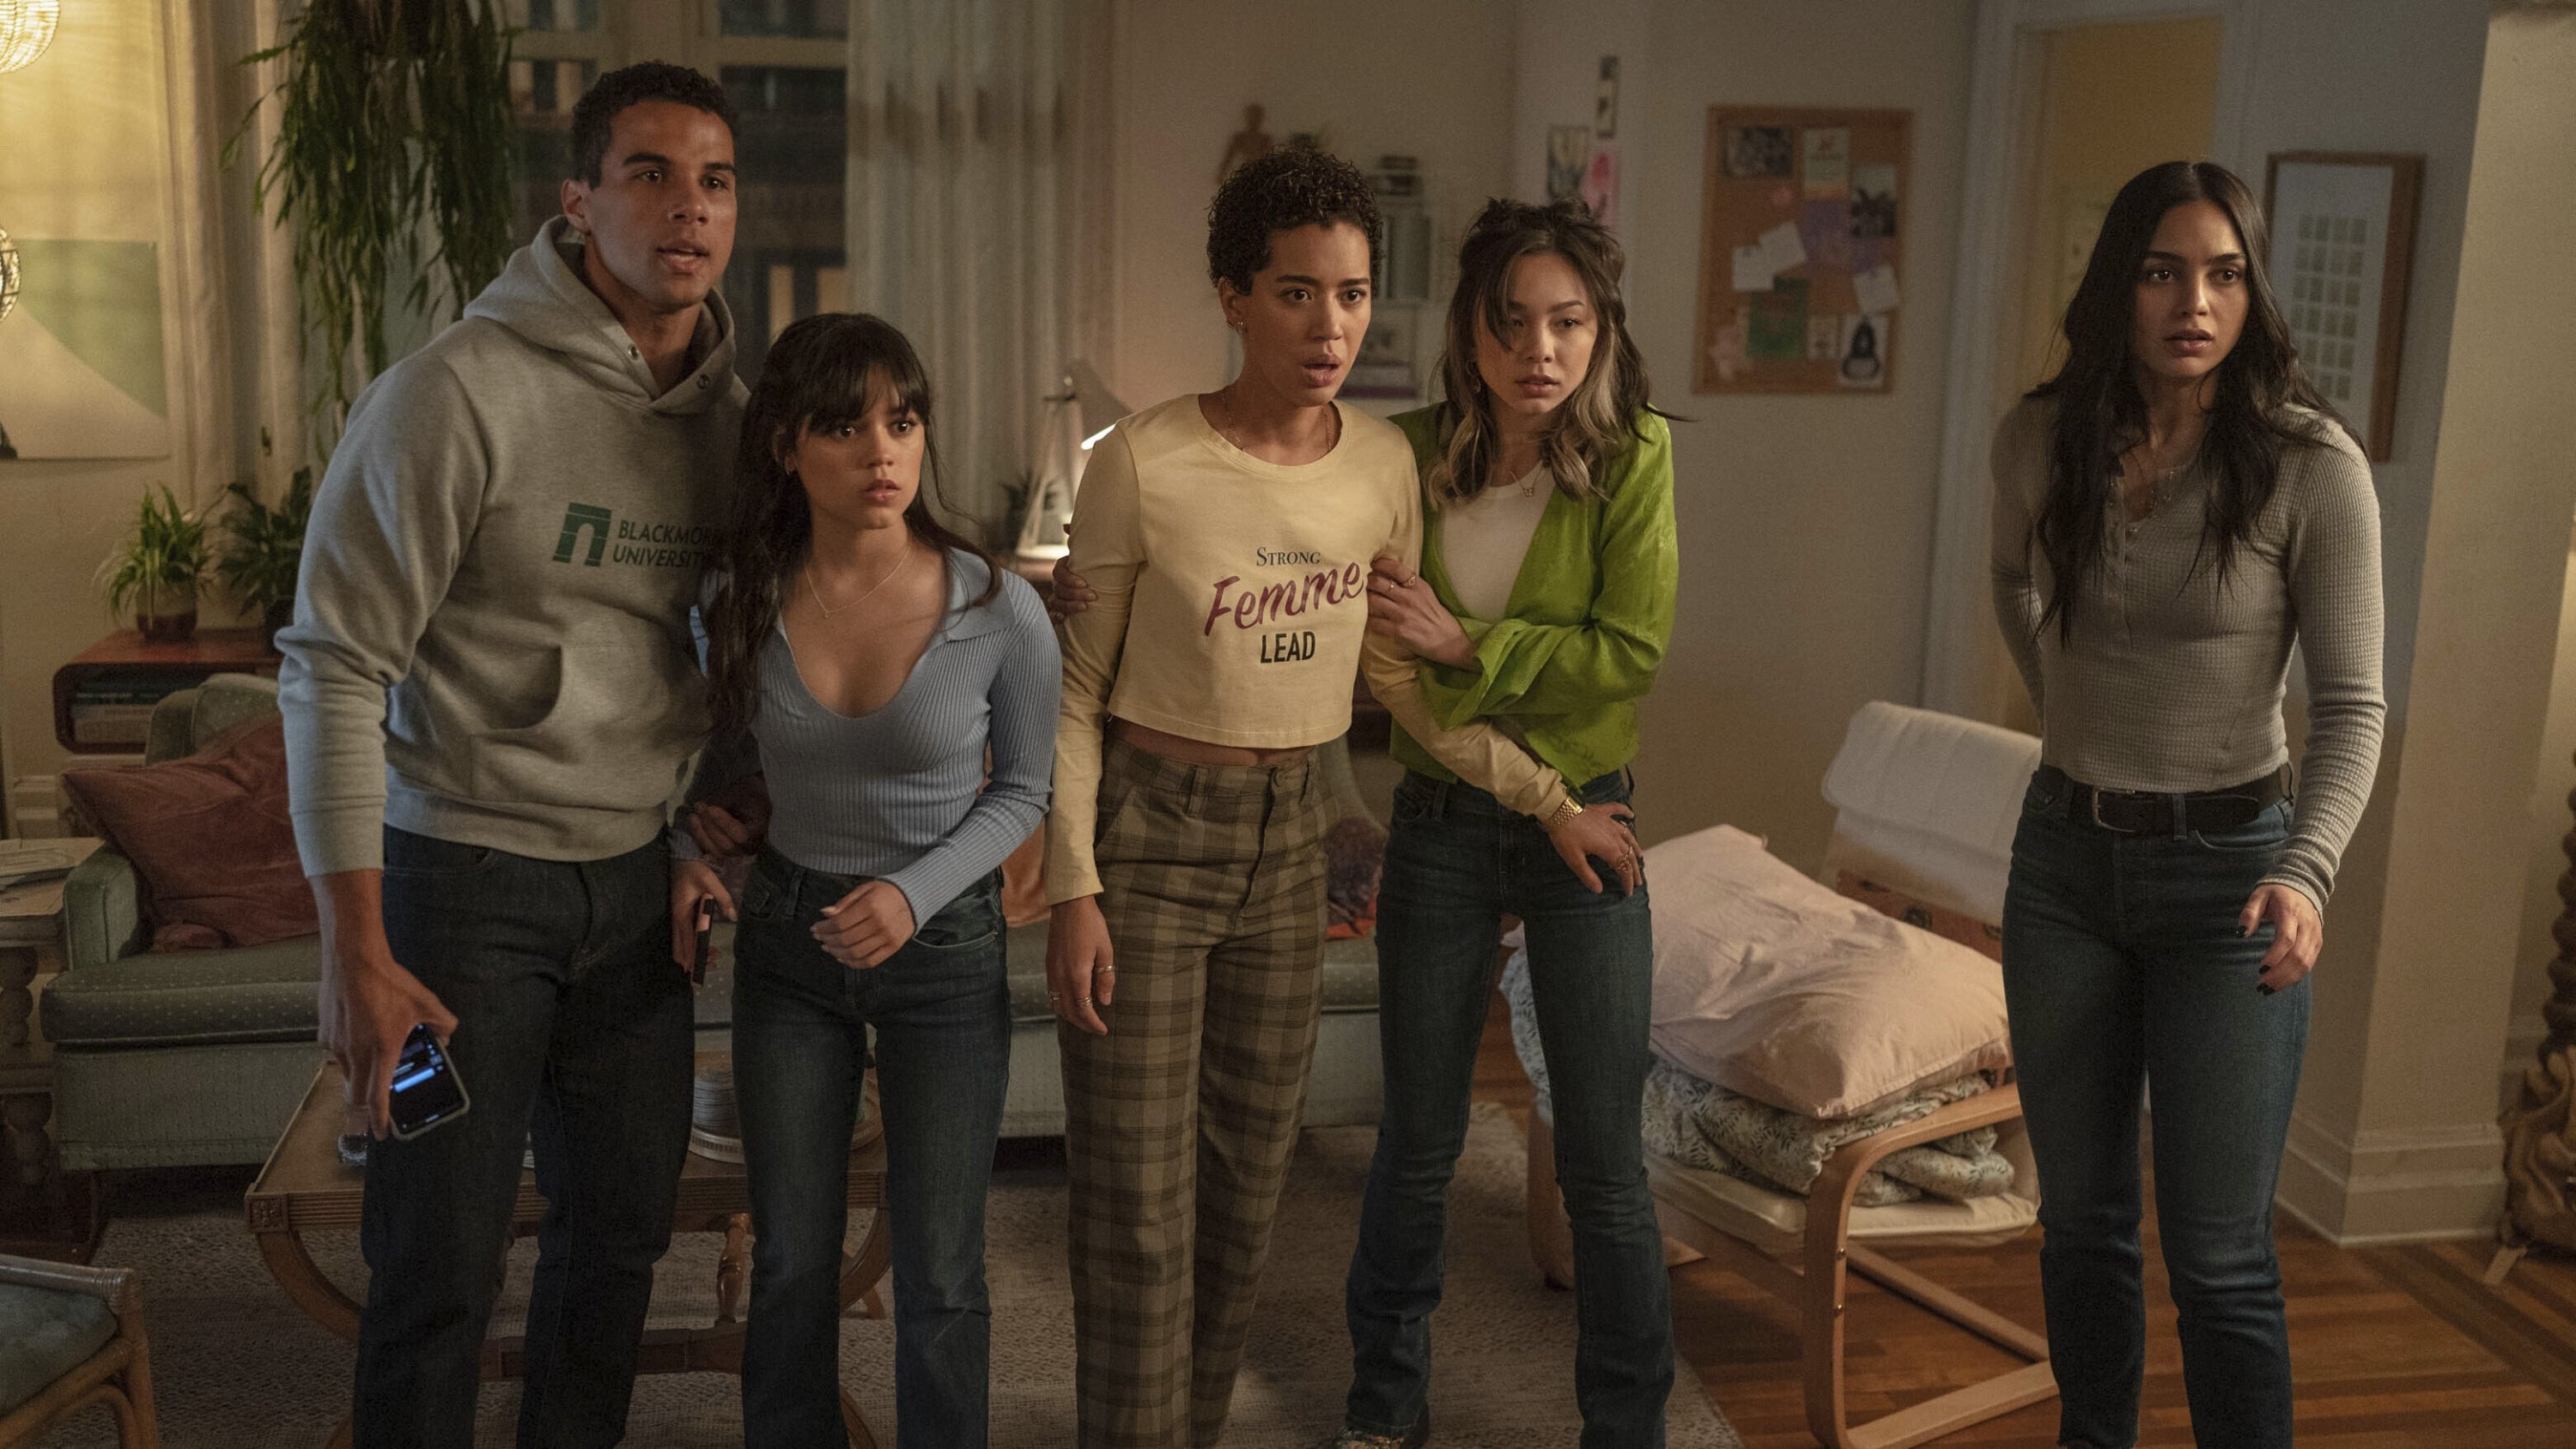 This image released by Paramount Pictures shows (L-R) Mason Gooding, Jenna Ortega, Jasmin Savoy Brown, Devyn Nekoda and Melissa Barrera in a scene from 